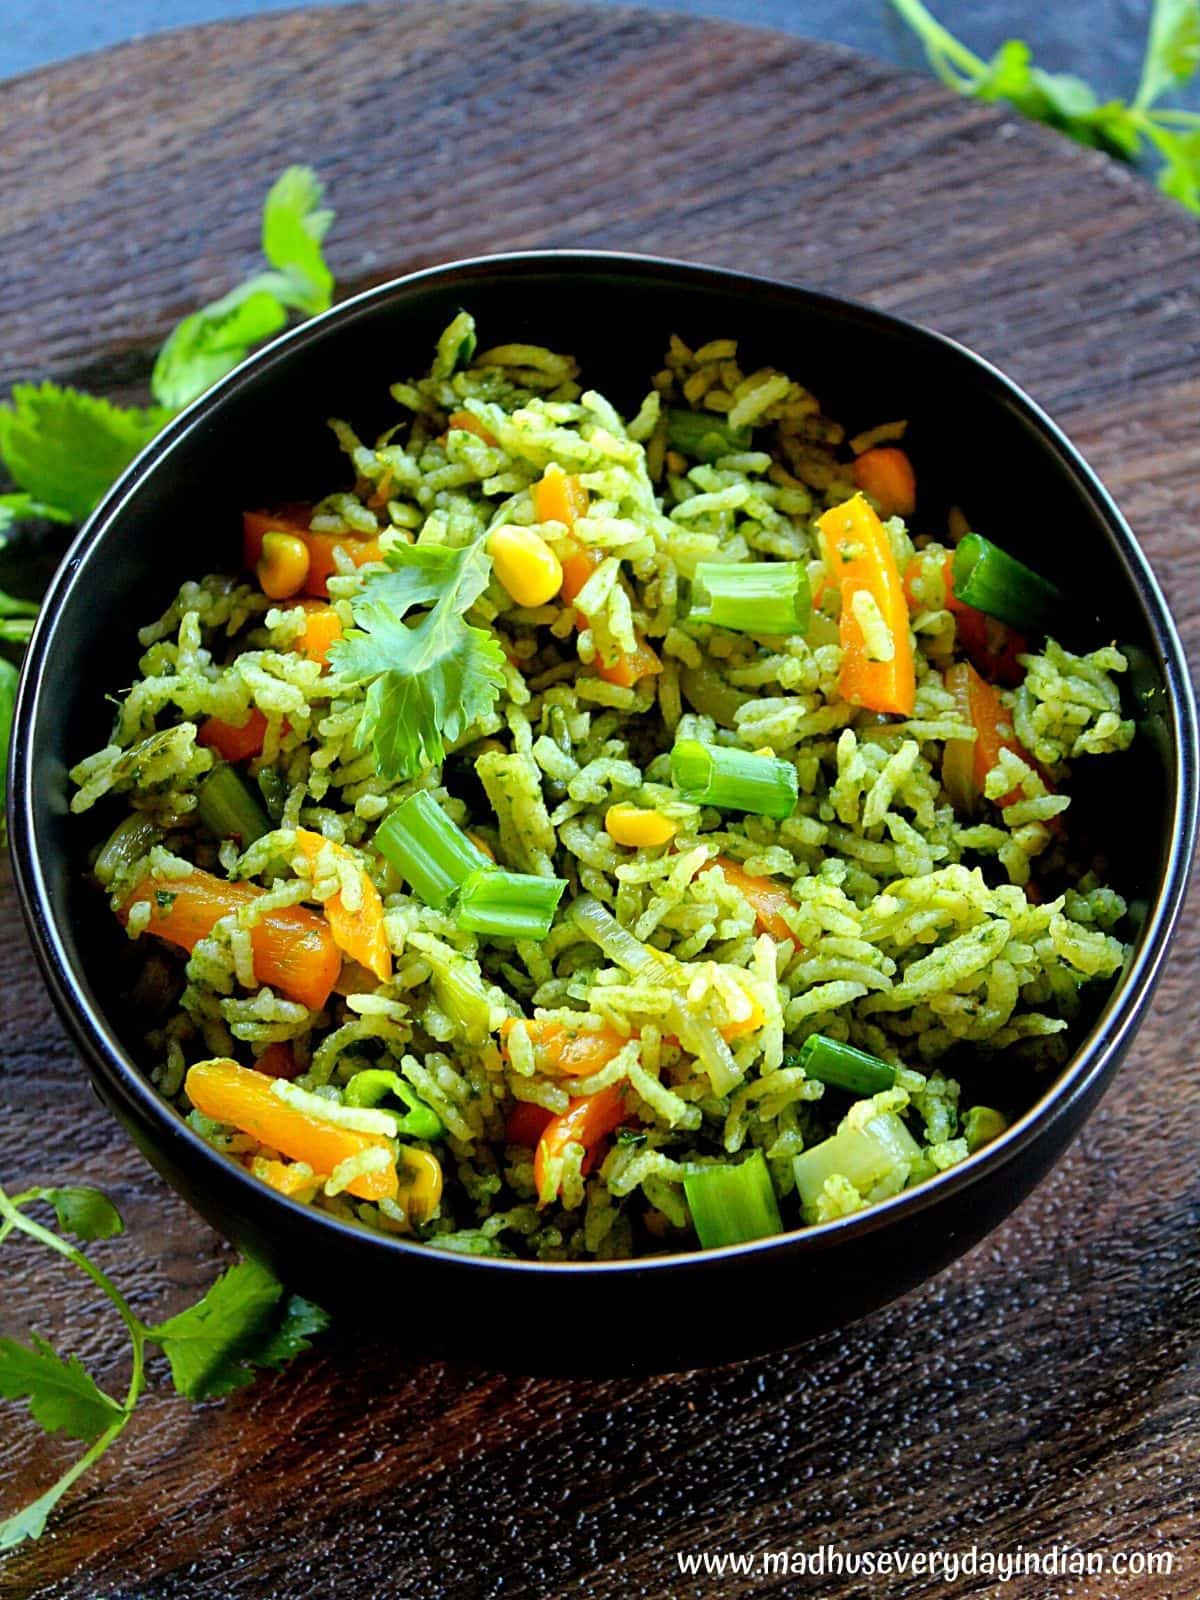 Spinach Fried Rice (Indian) | Palak Fried Rice - Madhu's Everyday Indian